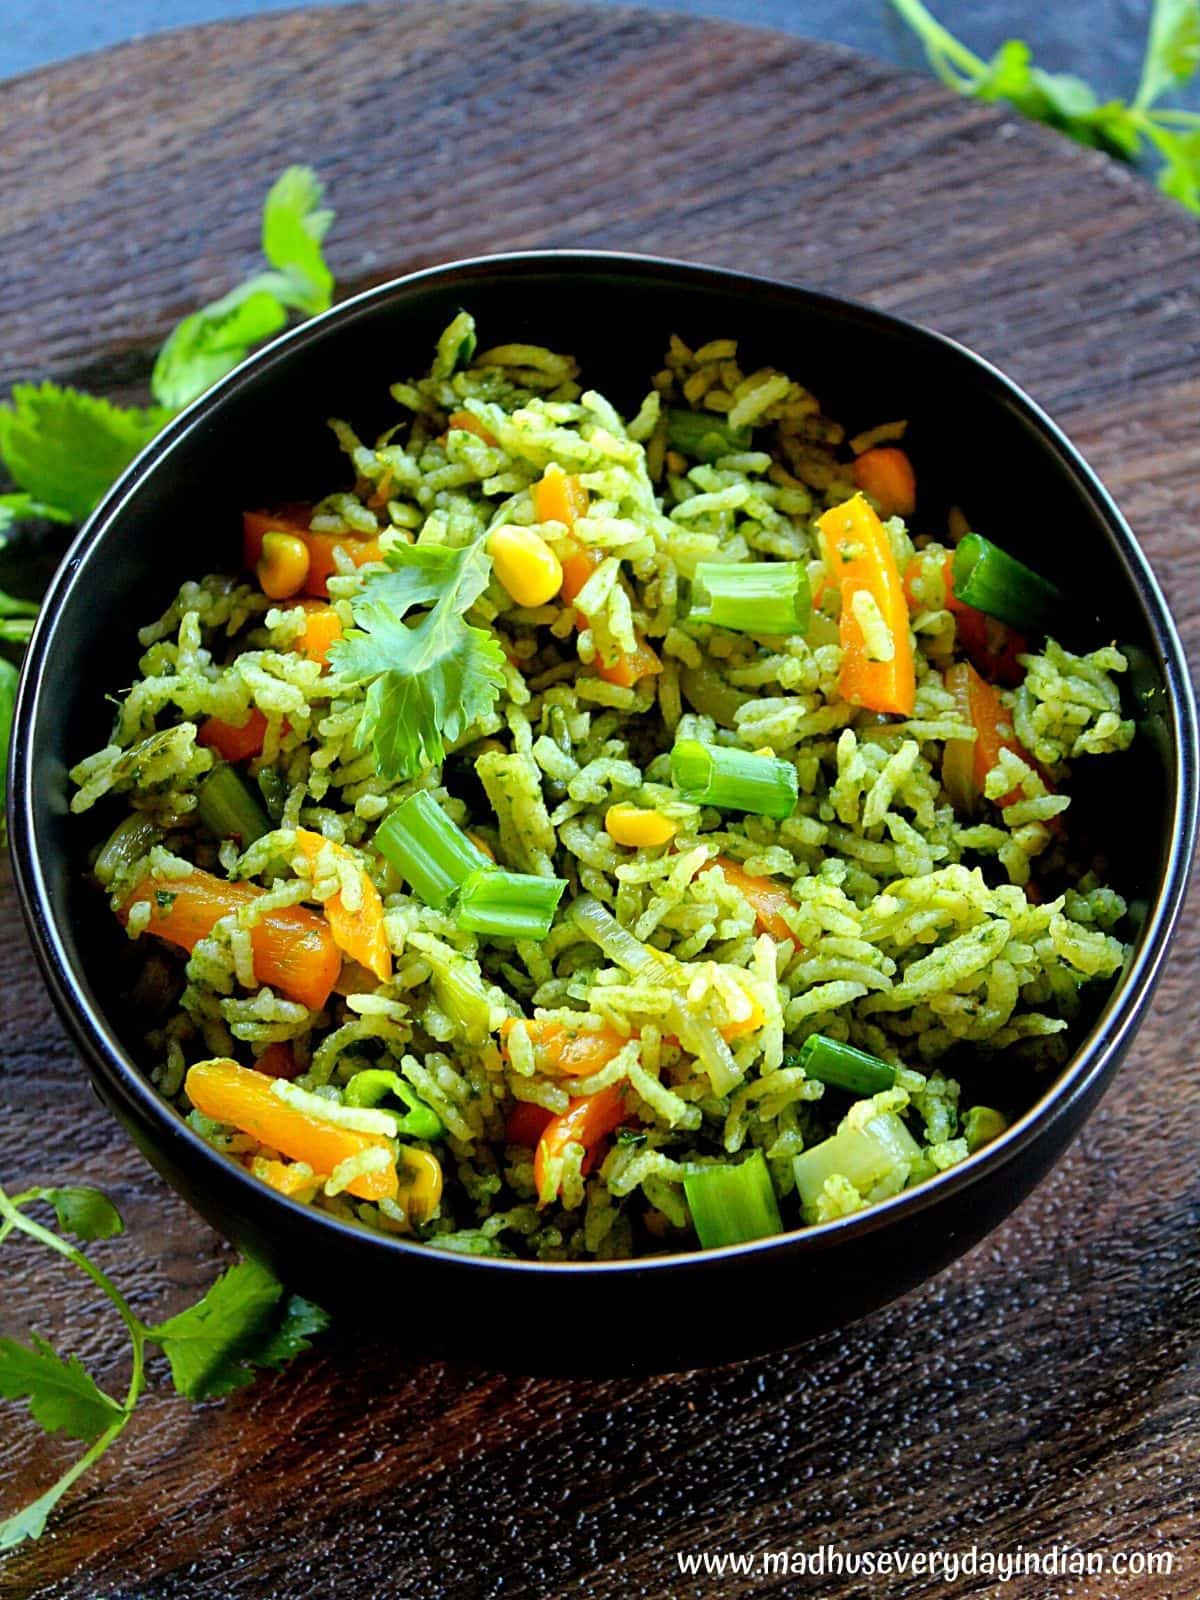 Spinach Fried Rice (Indian) | Palak Fried Rice - Madhu's Everyday Indian